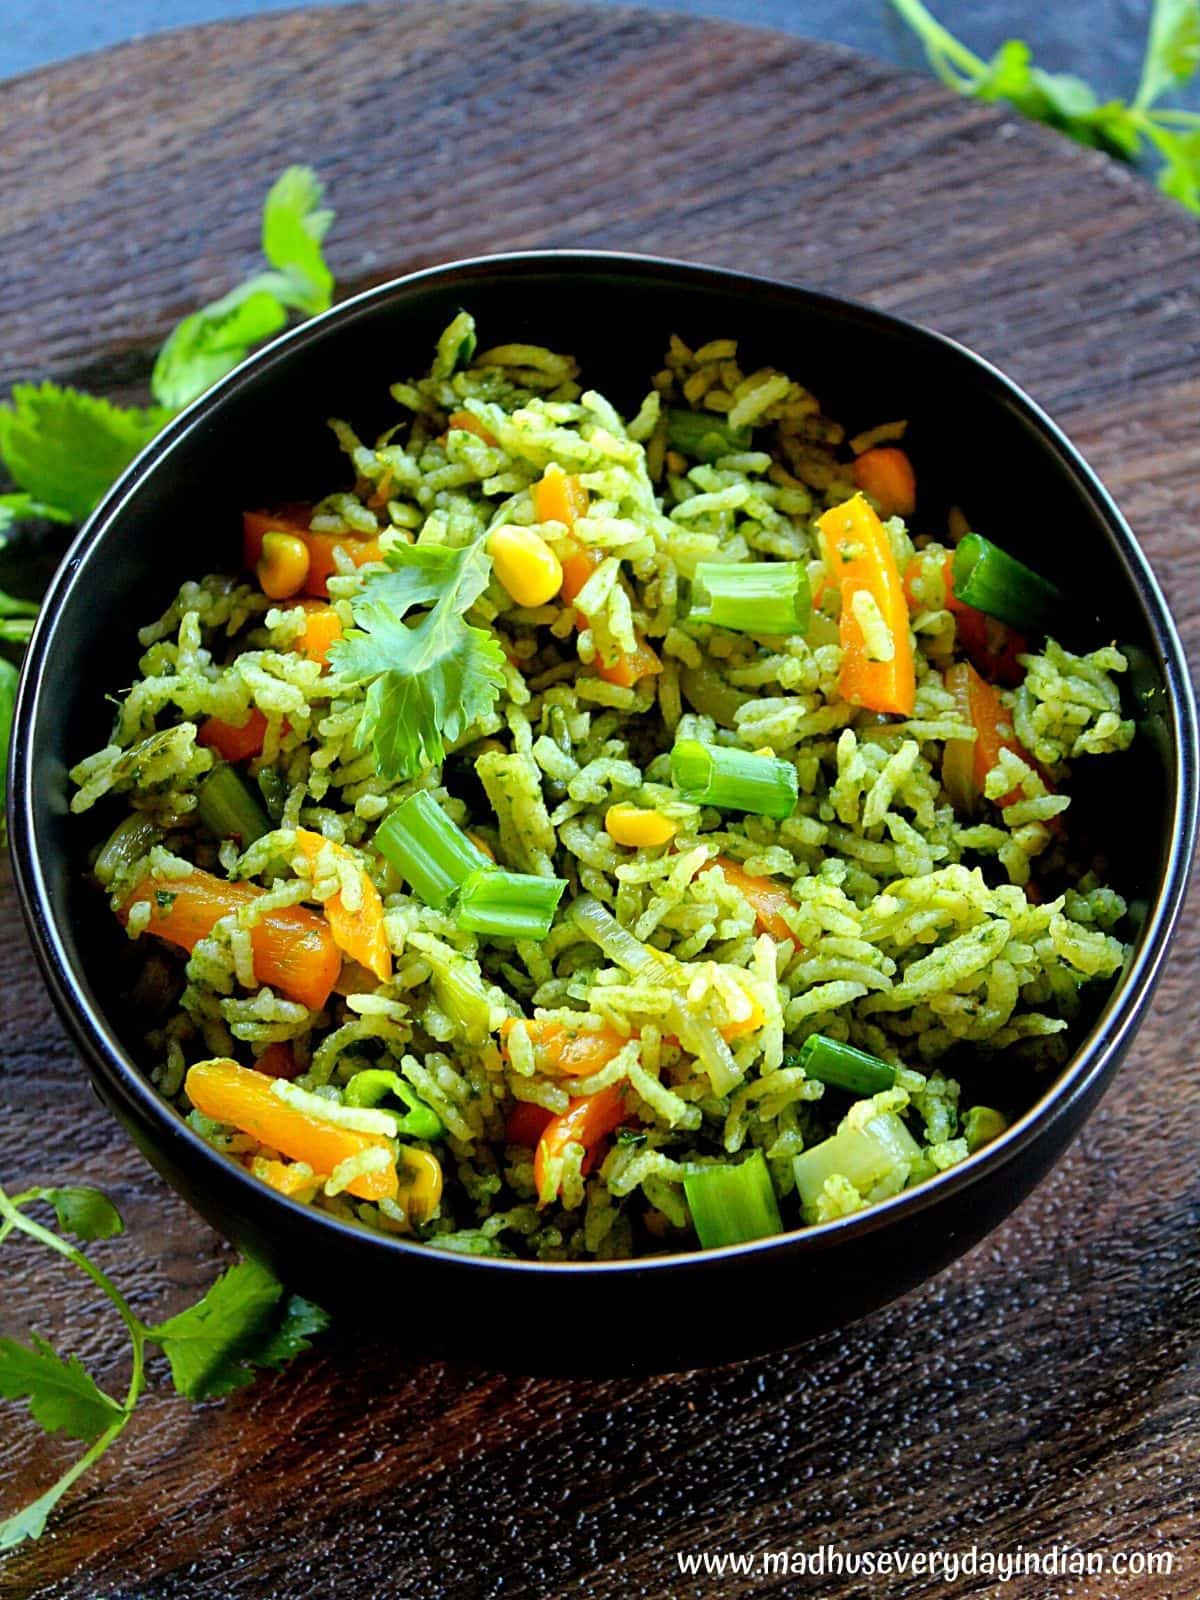 Spinach Fried Rice (Indian) | Palak Fried Rice - Madhu's Everyday Indian